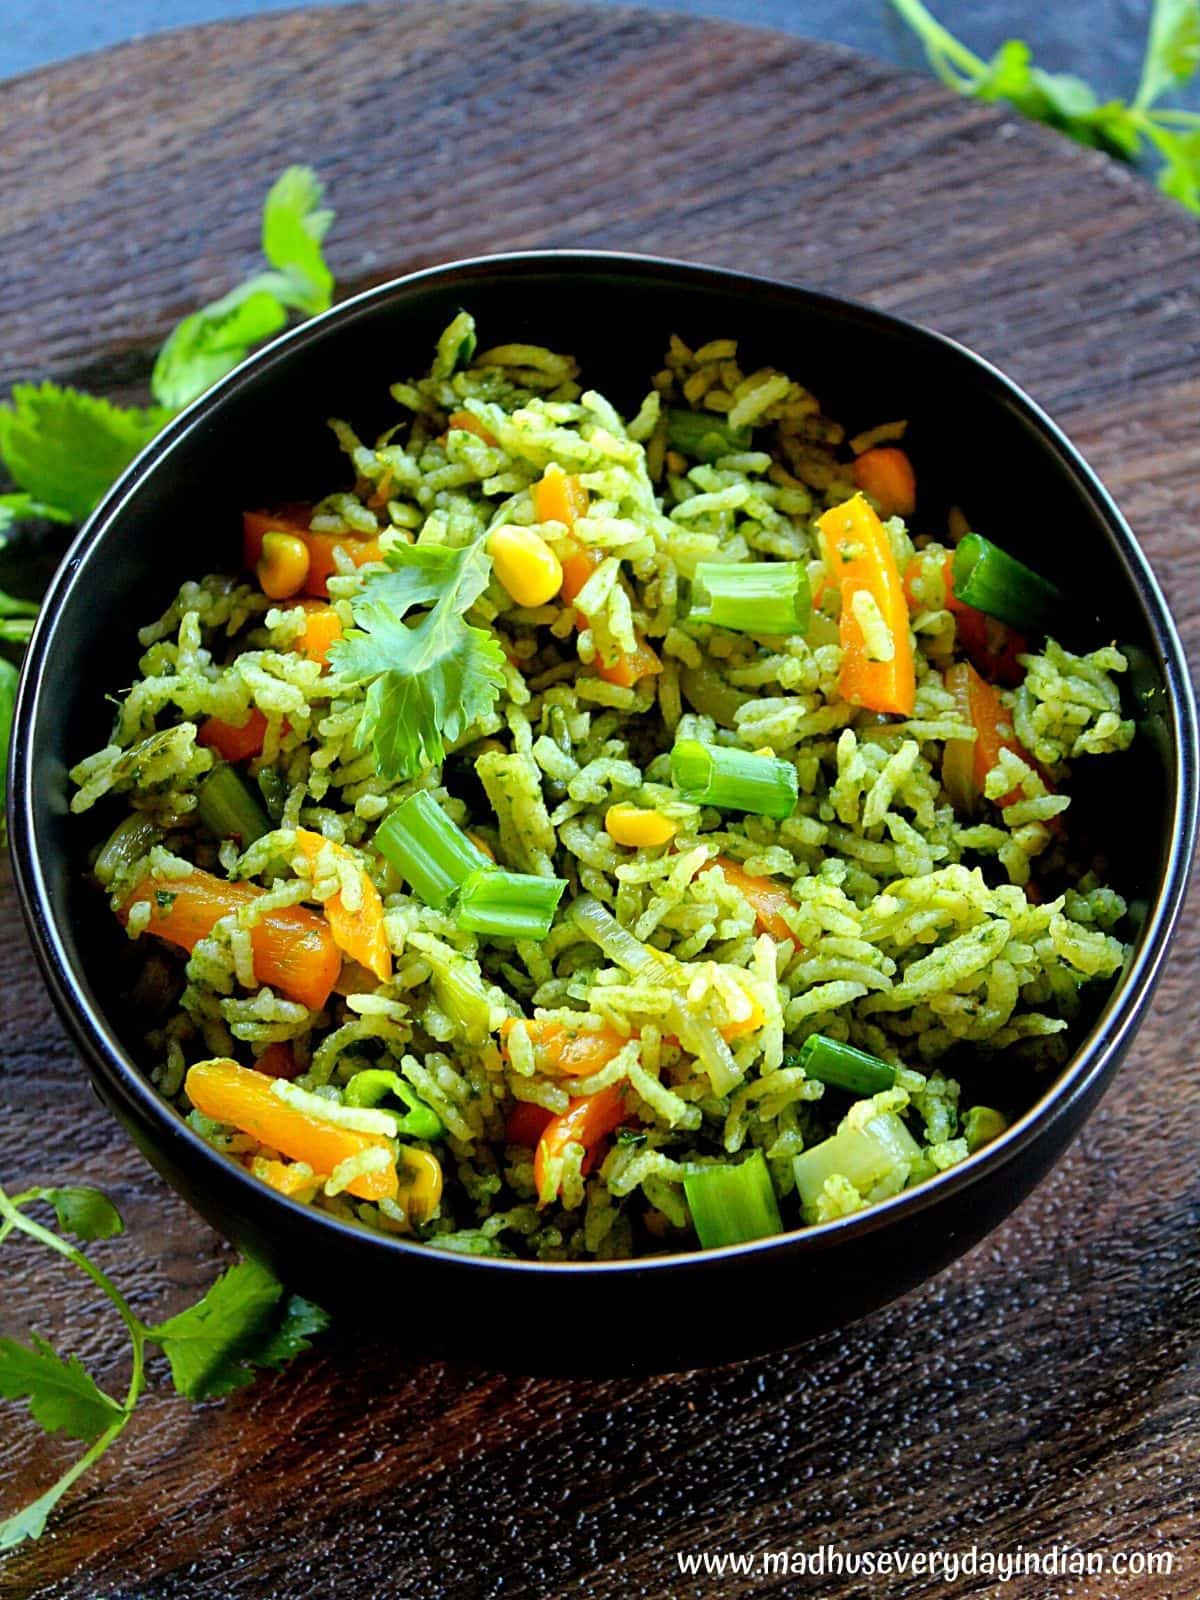 Spinach Fried Rice (Indian) | Palak Fried Rice - Madhu's Everyday Indian